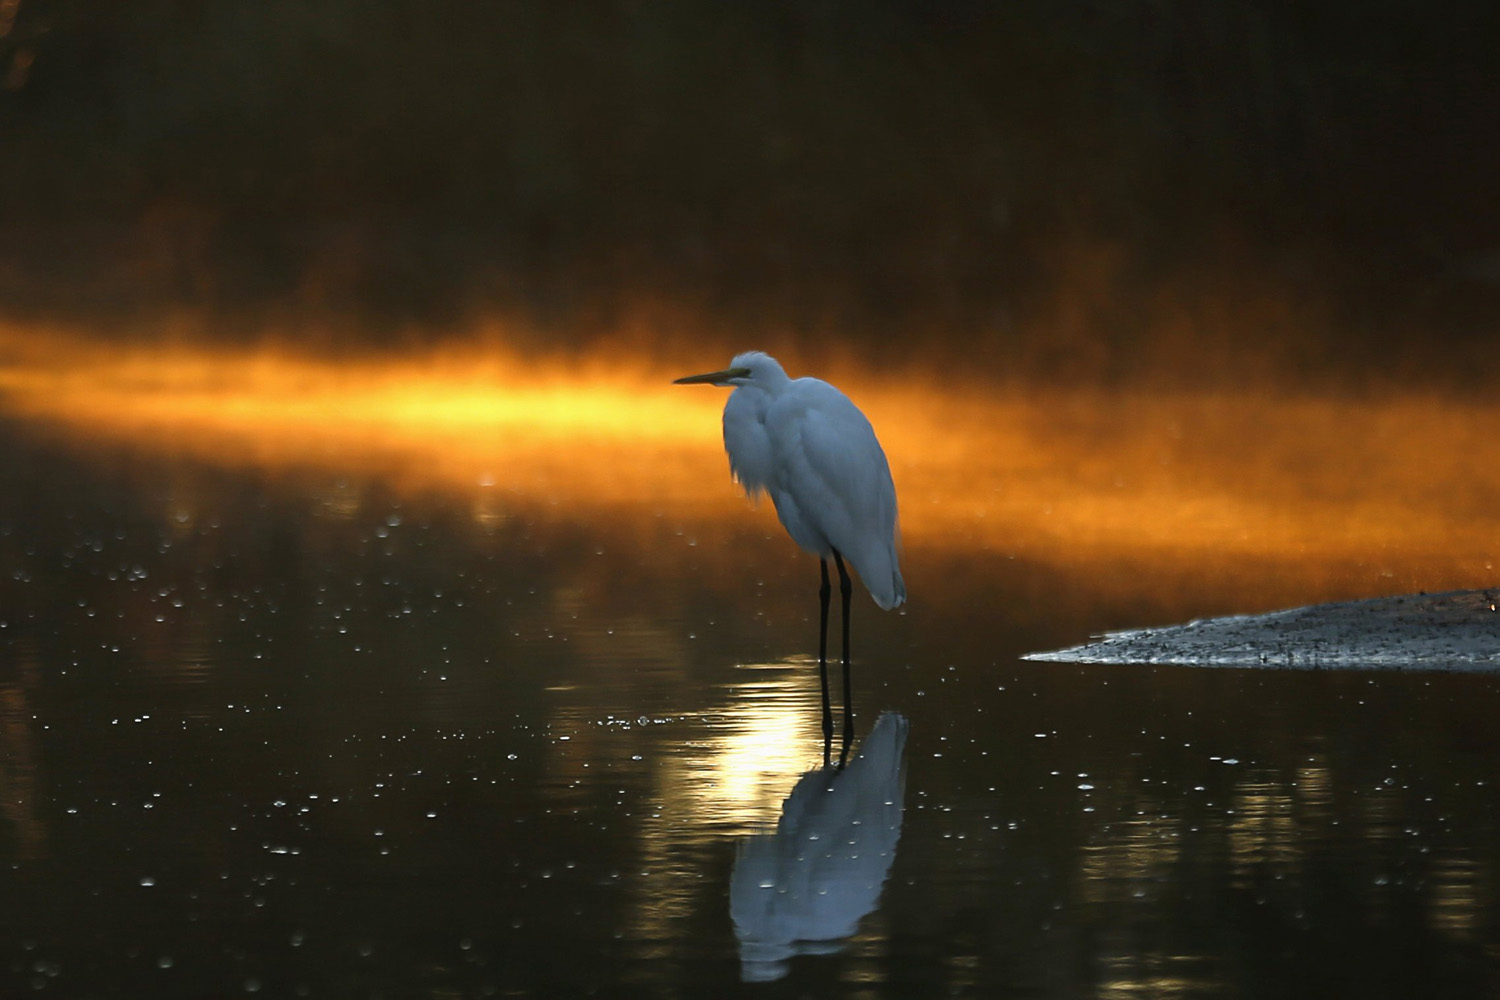 Oct. 26, 2013. An Egret sits in a canal as morning sun reflects off the mist, on Assateague Island off the Virginia Coast.